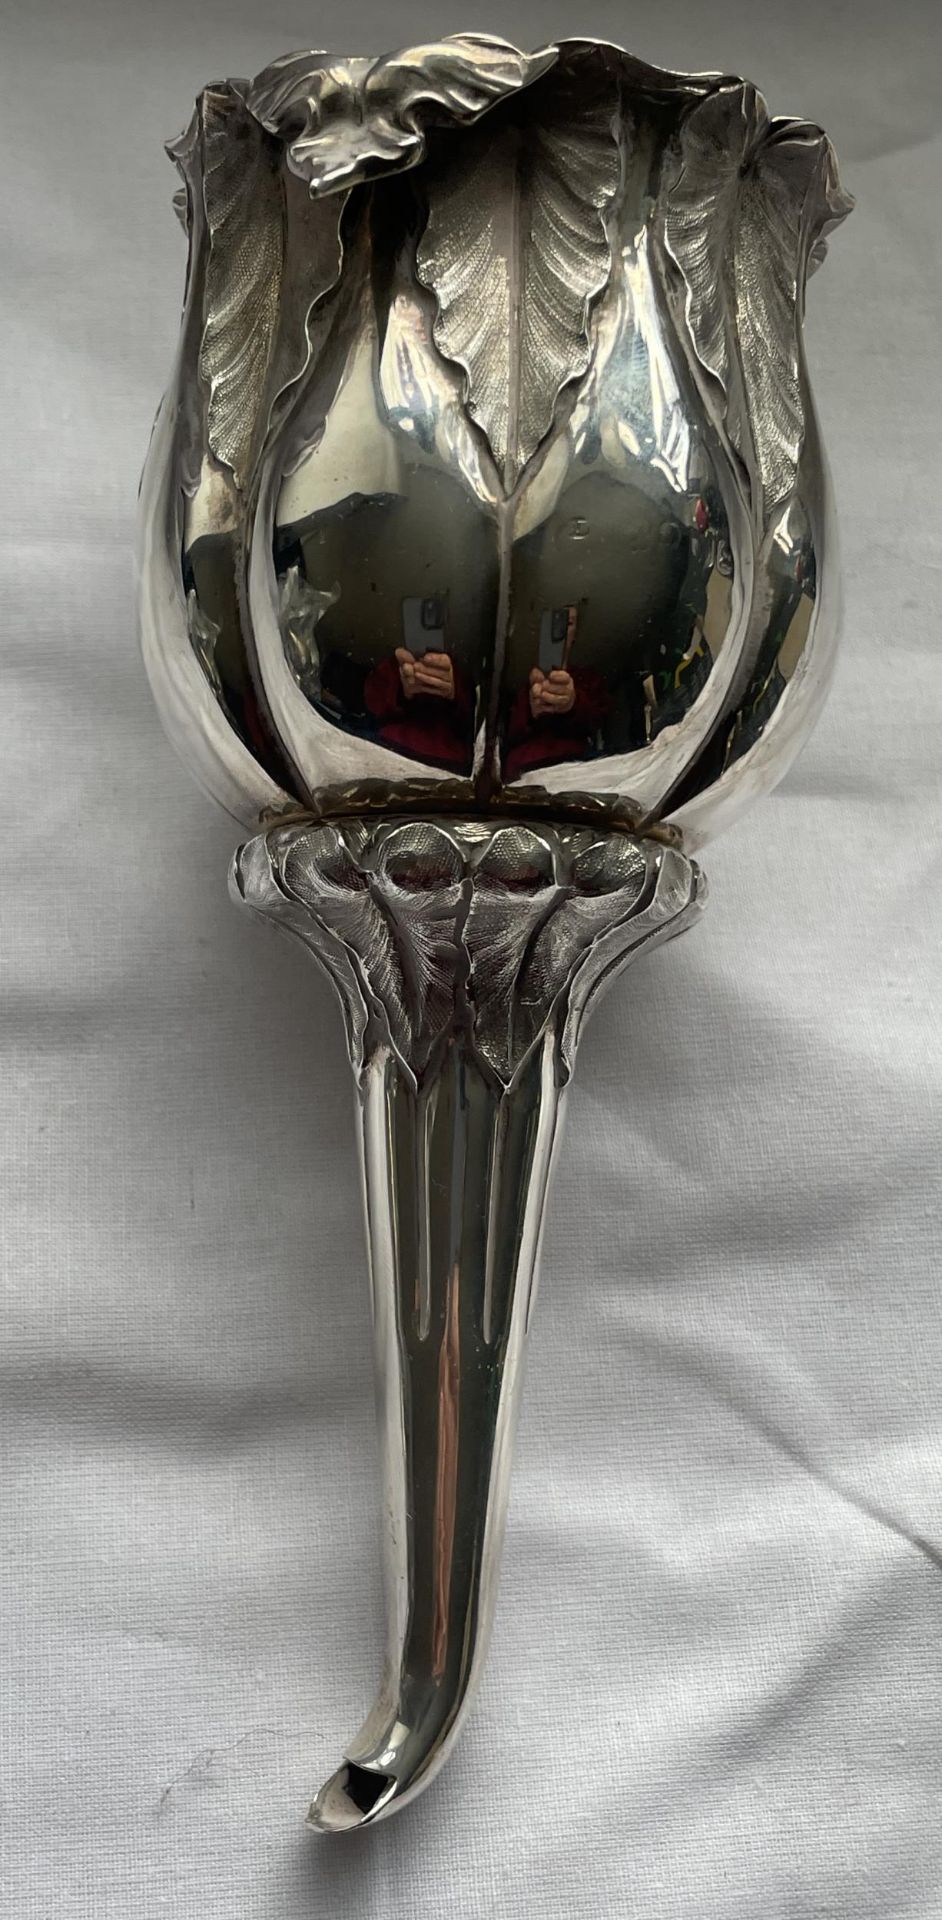 A GEORGIAN HALLMARKED SILVER TWO PIECE ROSE DESIGN FUNNEL, MARKS INDISTINCT, WEIGHT 131 GRAMS - Image 2 of 18